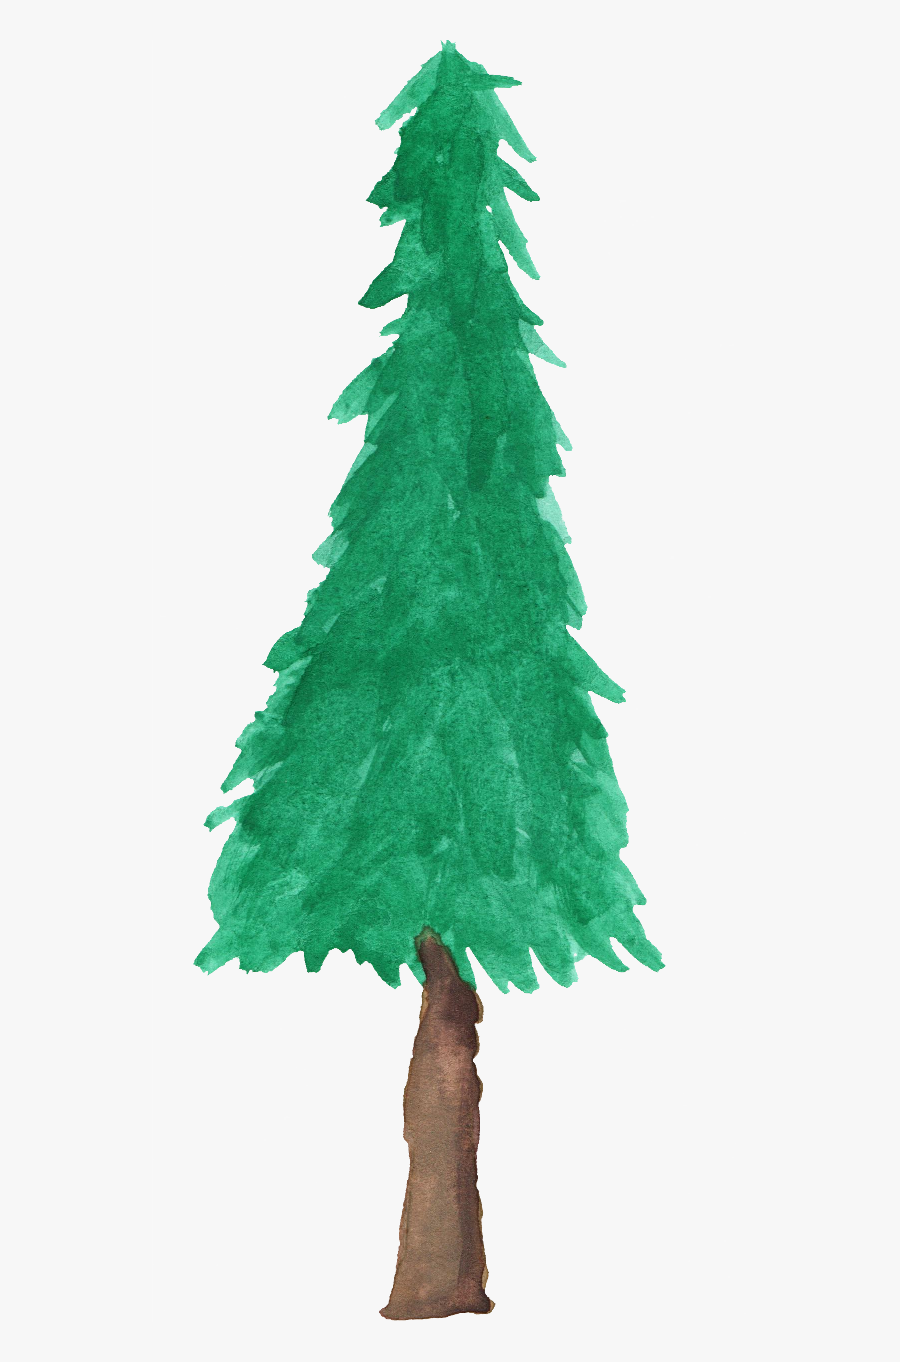 Watercolor Pine Tree - Pine Tree Watercolor Free, Transparent Clipart